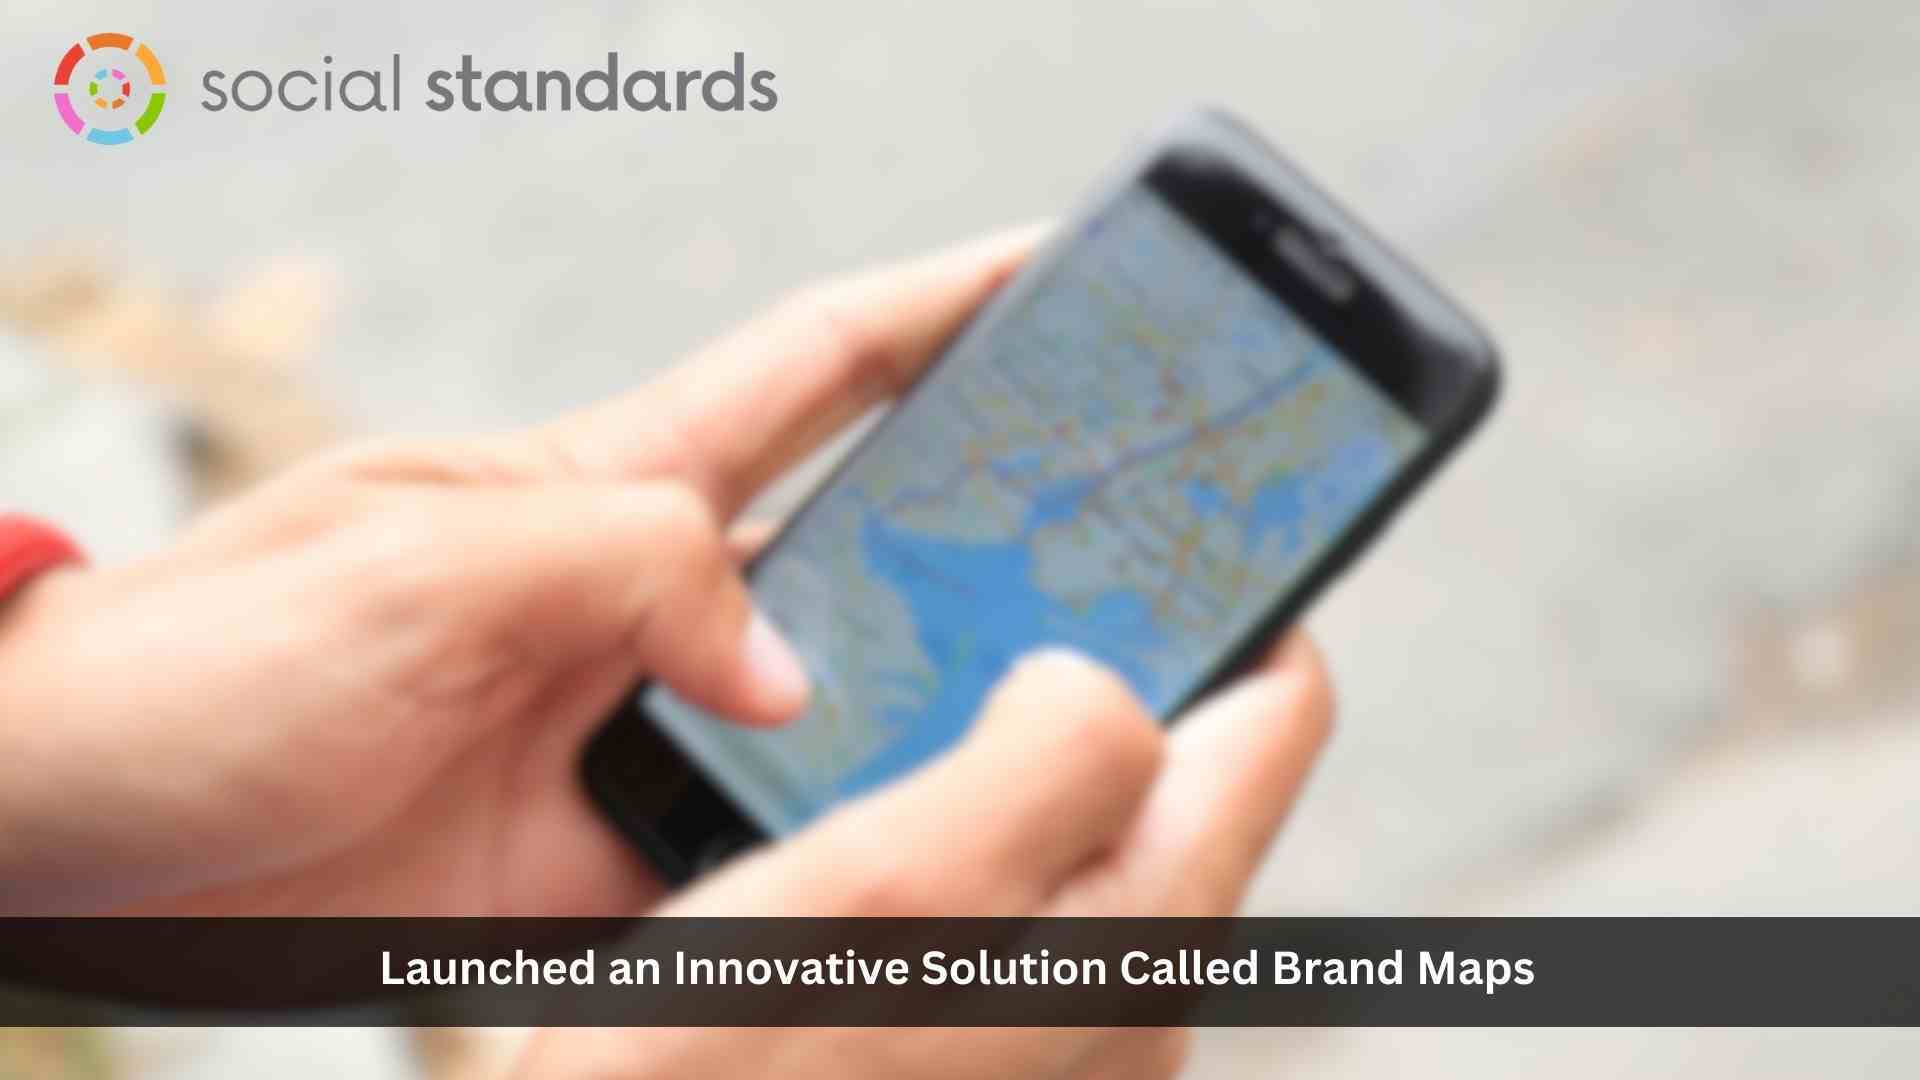 Investors and Marketers Use Brand Maps To Identify Breakout Consumer Brands